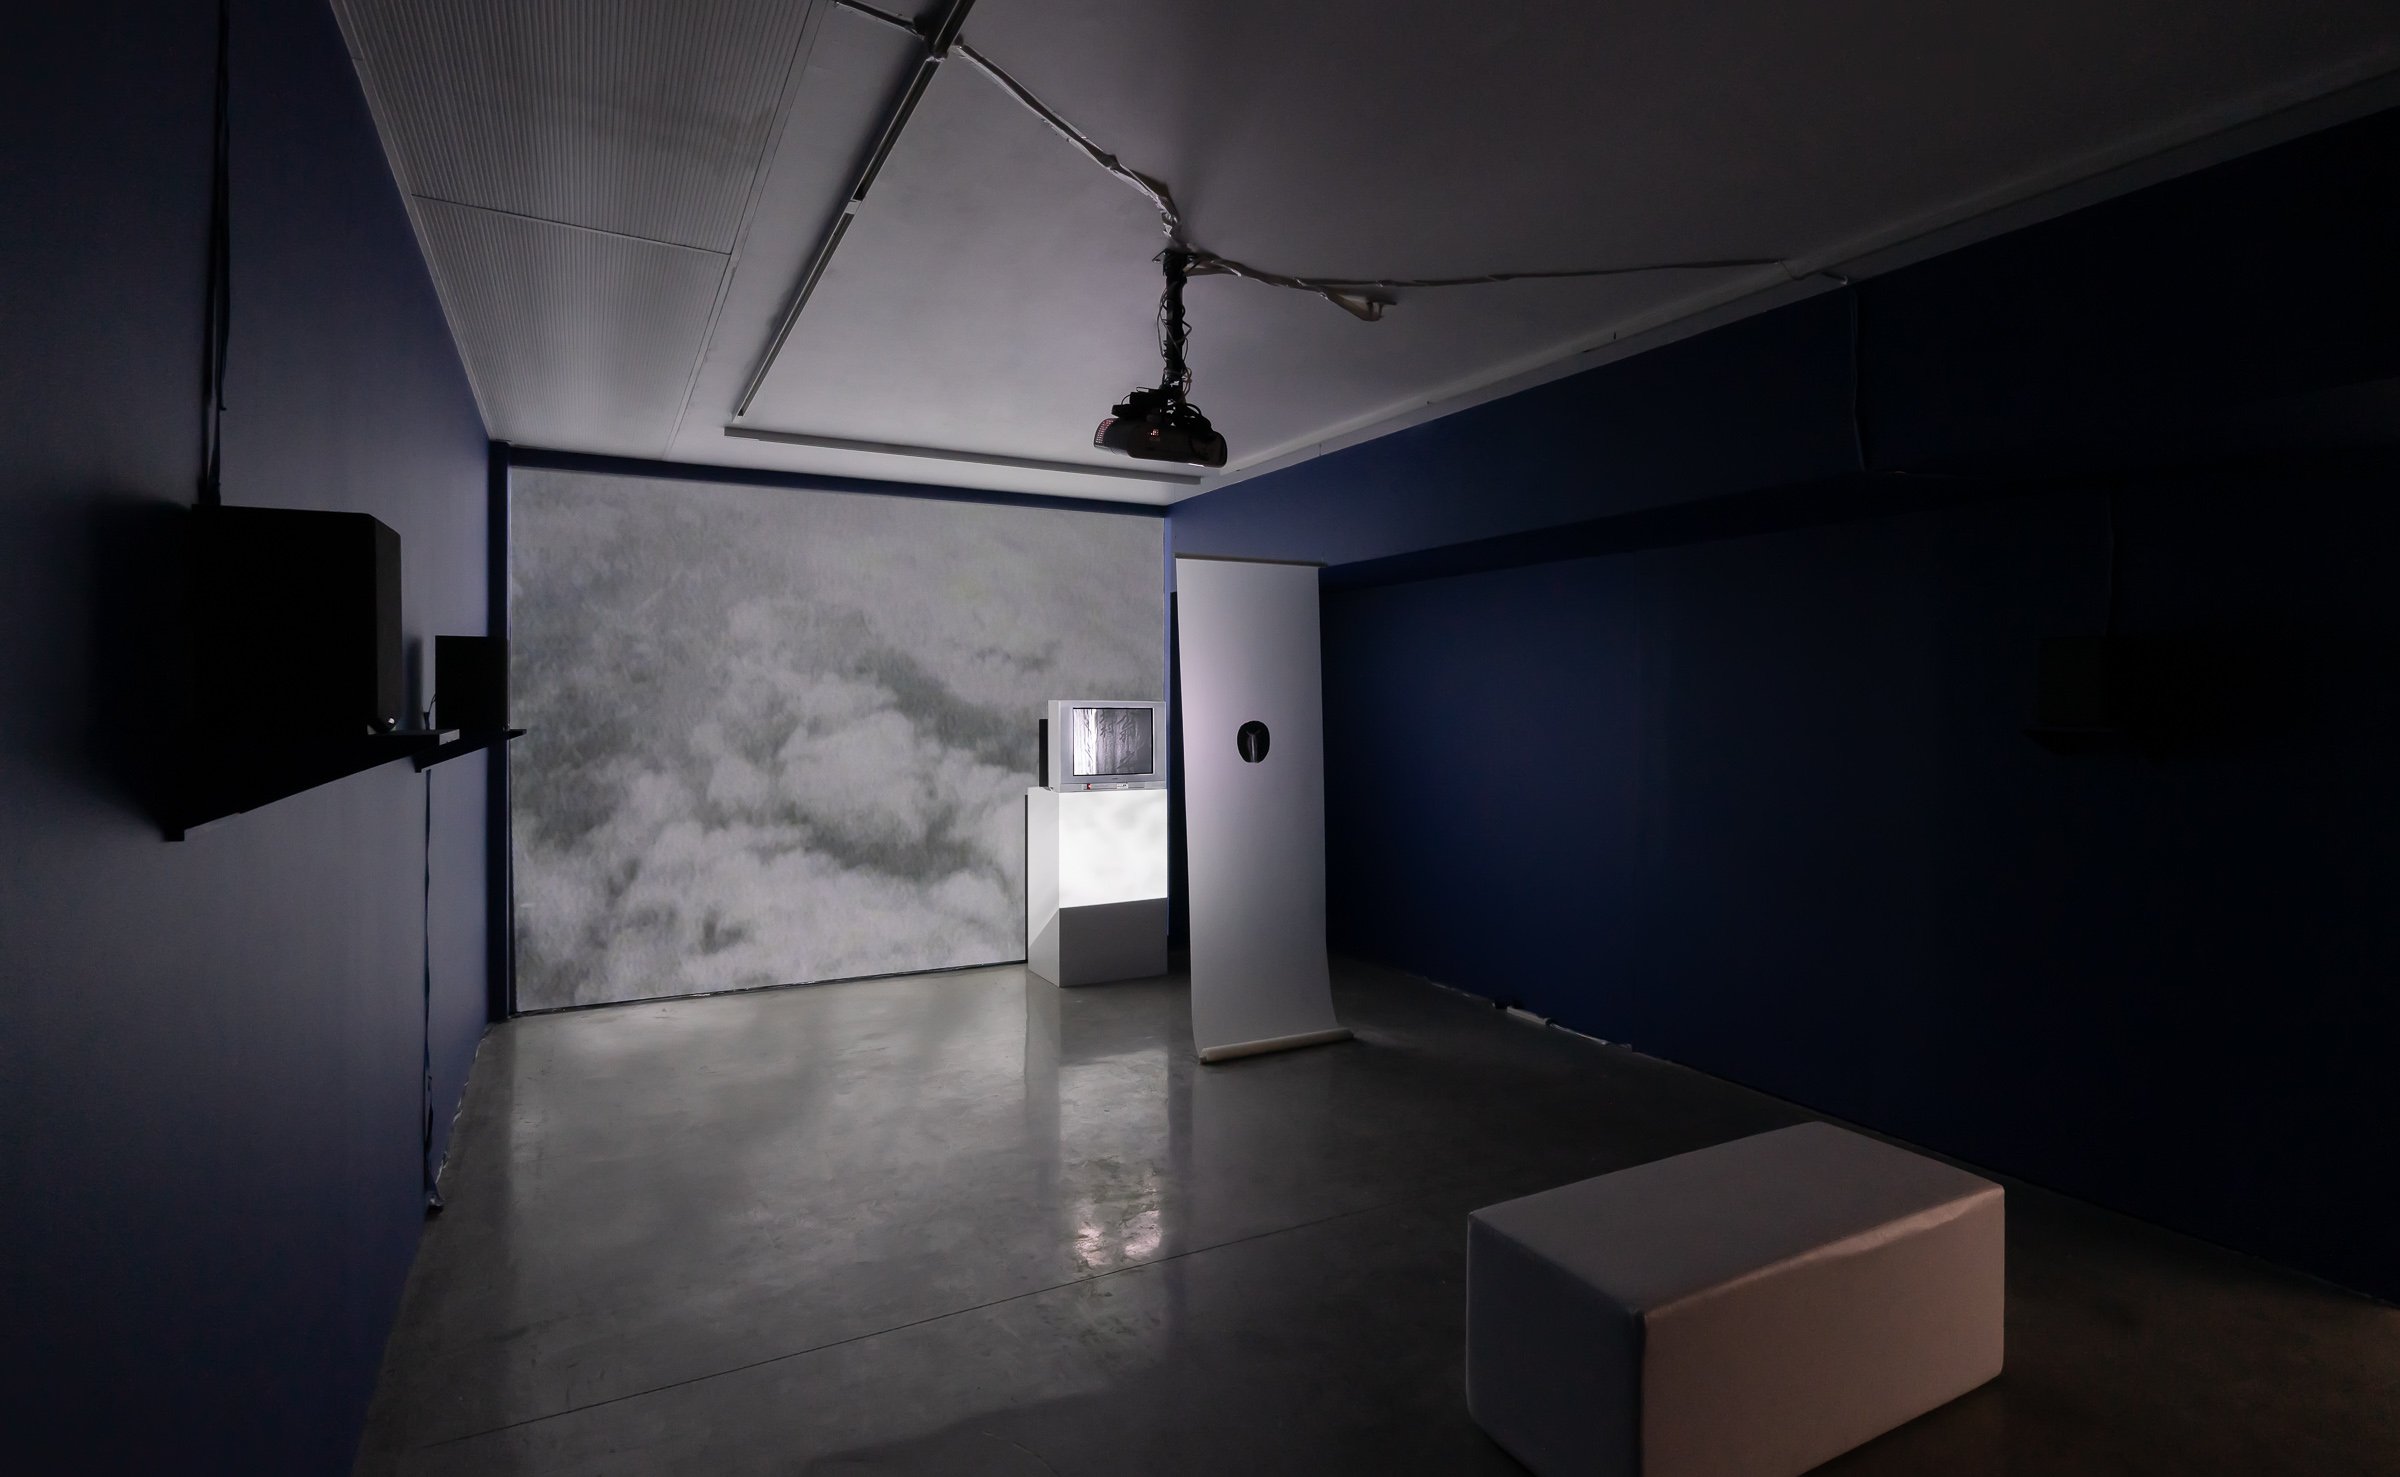   Between Departure and Arrival , 1997, two-channel video installation, sound, print on mylar scroll, Variable dimensions, 9 minutes, 51 seconds (loop). Collection of the artist. Photo by Blaine Campbell. 